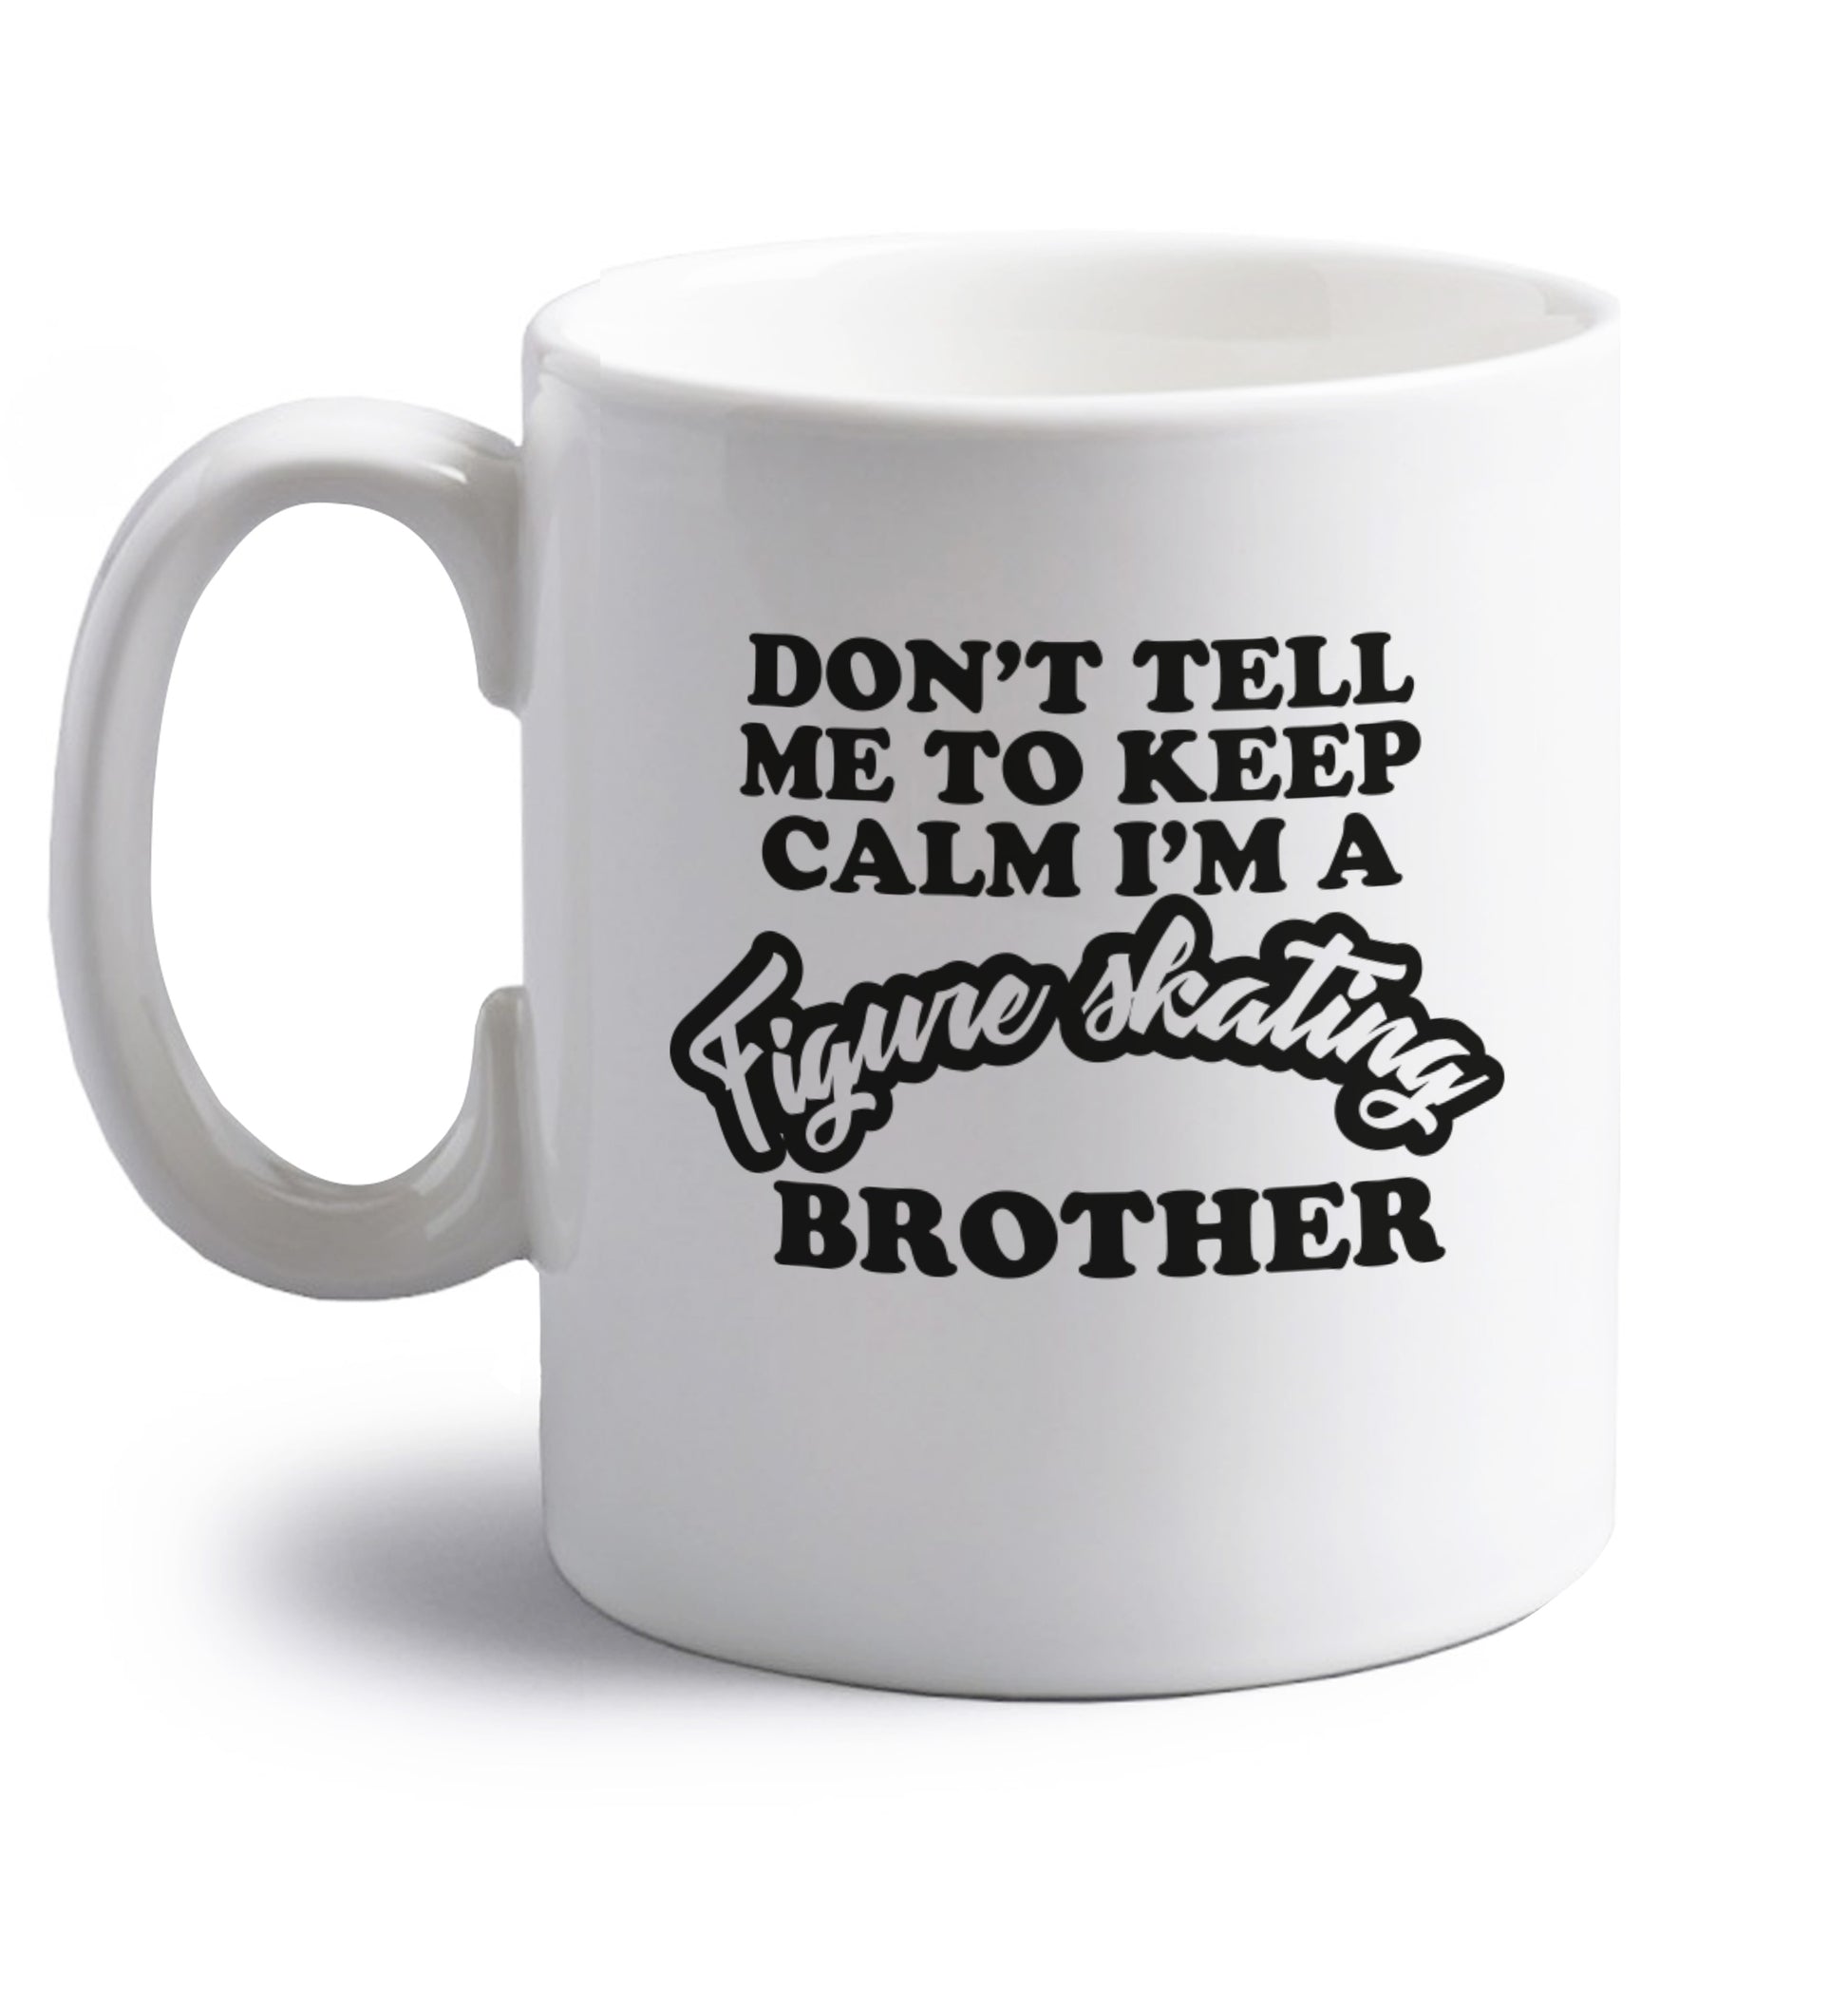 Don't tell me to keep calm I'm a figure skating brother right handed white ceramic mug 